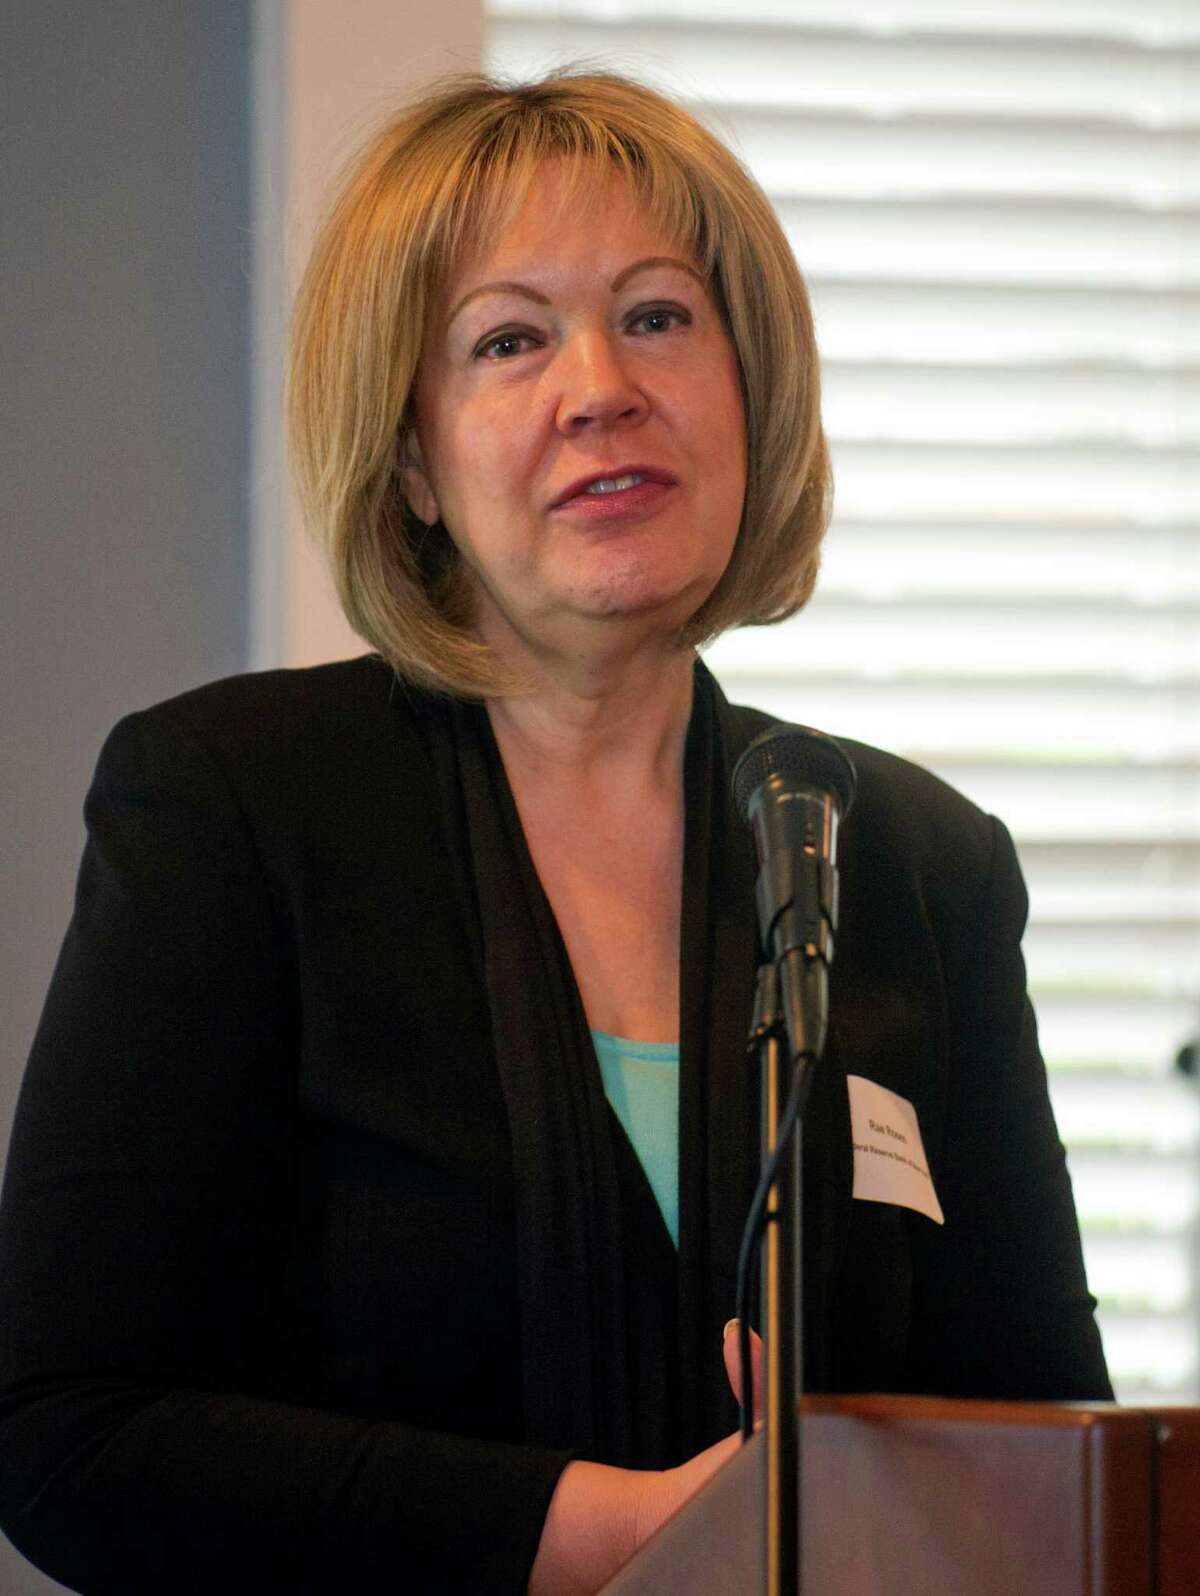 Rae Rosen, Vice President of Regional and Community Outreach for the Federal Reserve Bank of New York, speaks about the economy in the region during the Greenwich Chamber of Commerce's annual meeting and breakfast in Greenwich, Conn., on Thursday, November 6, 2014.